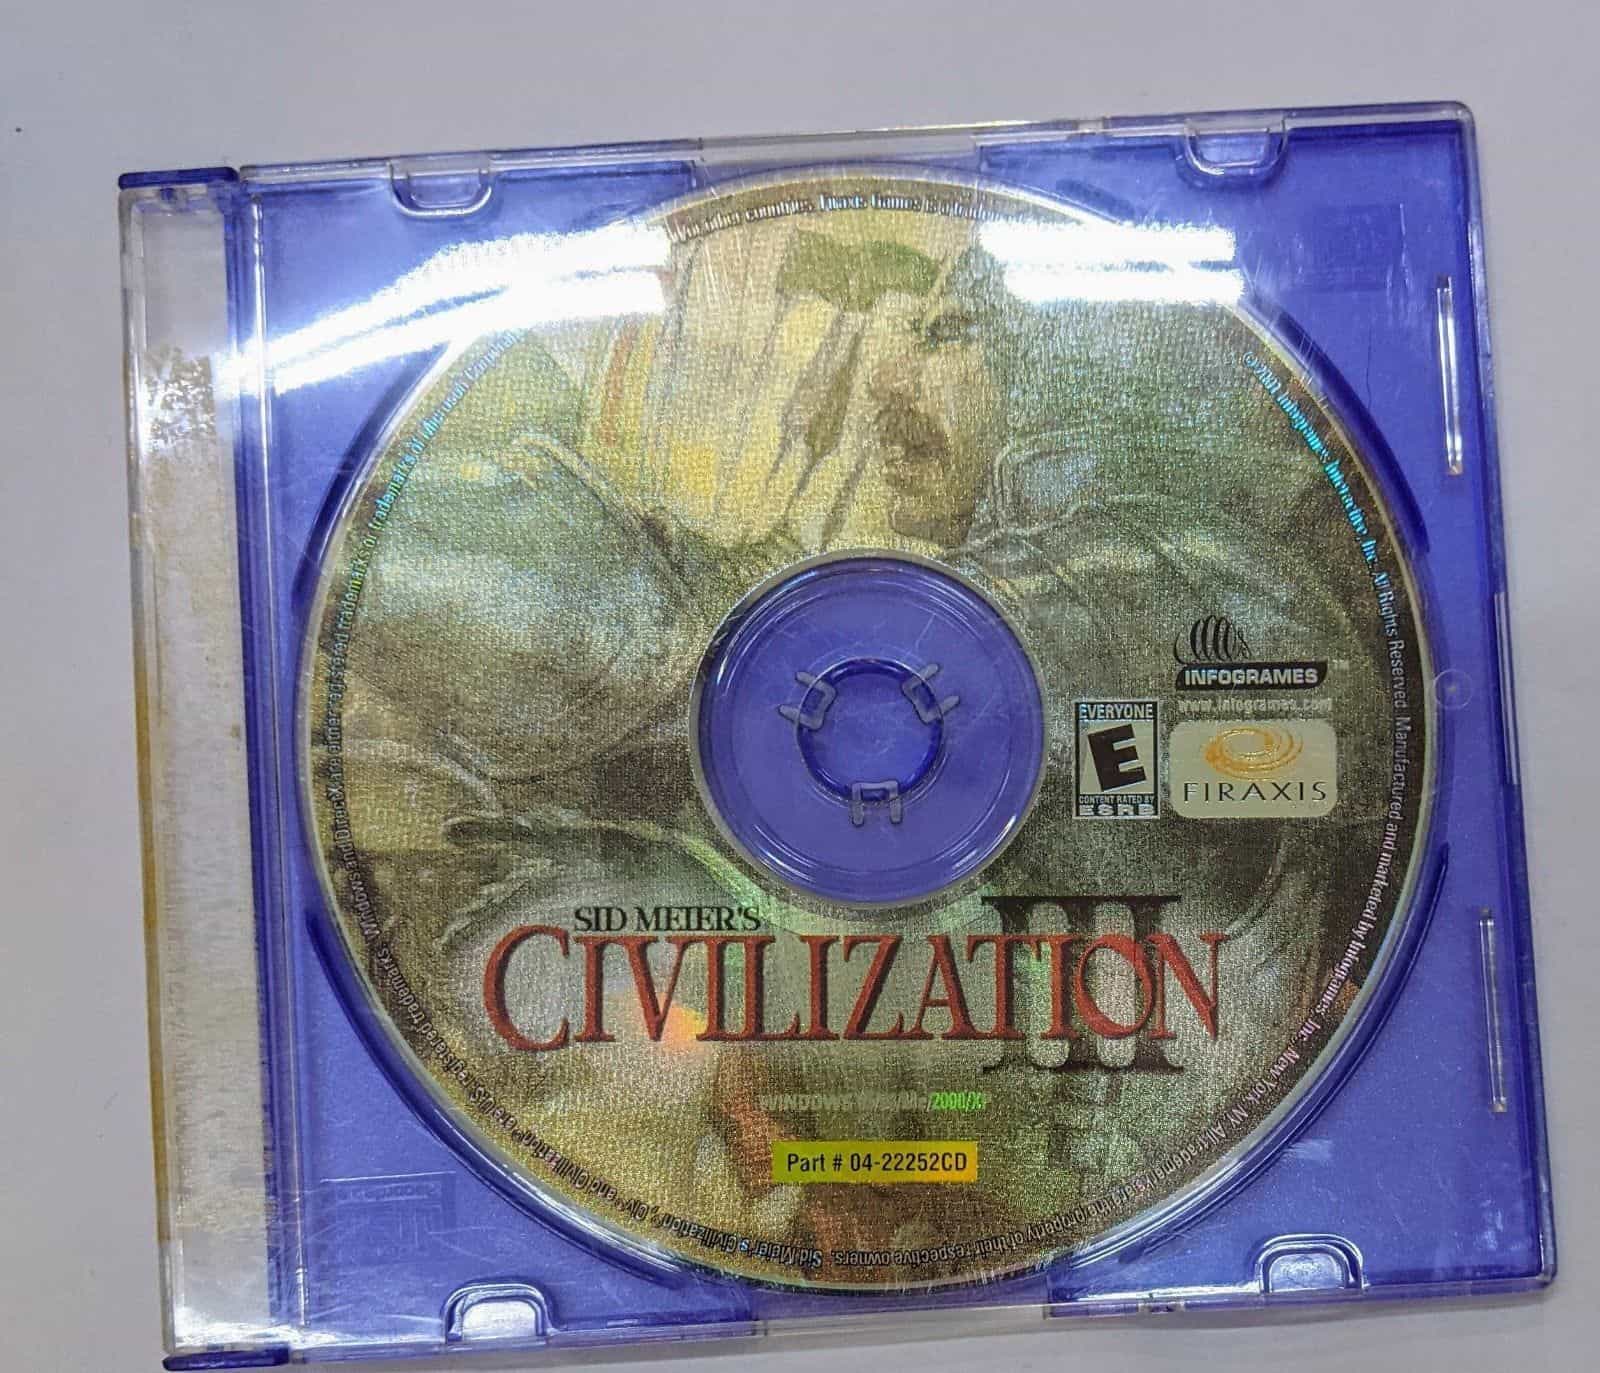 Sid Meier’s Civilization III PC Game Disc Replacement